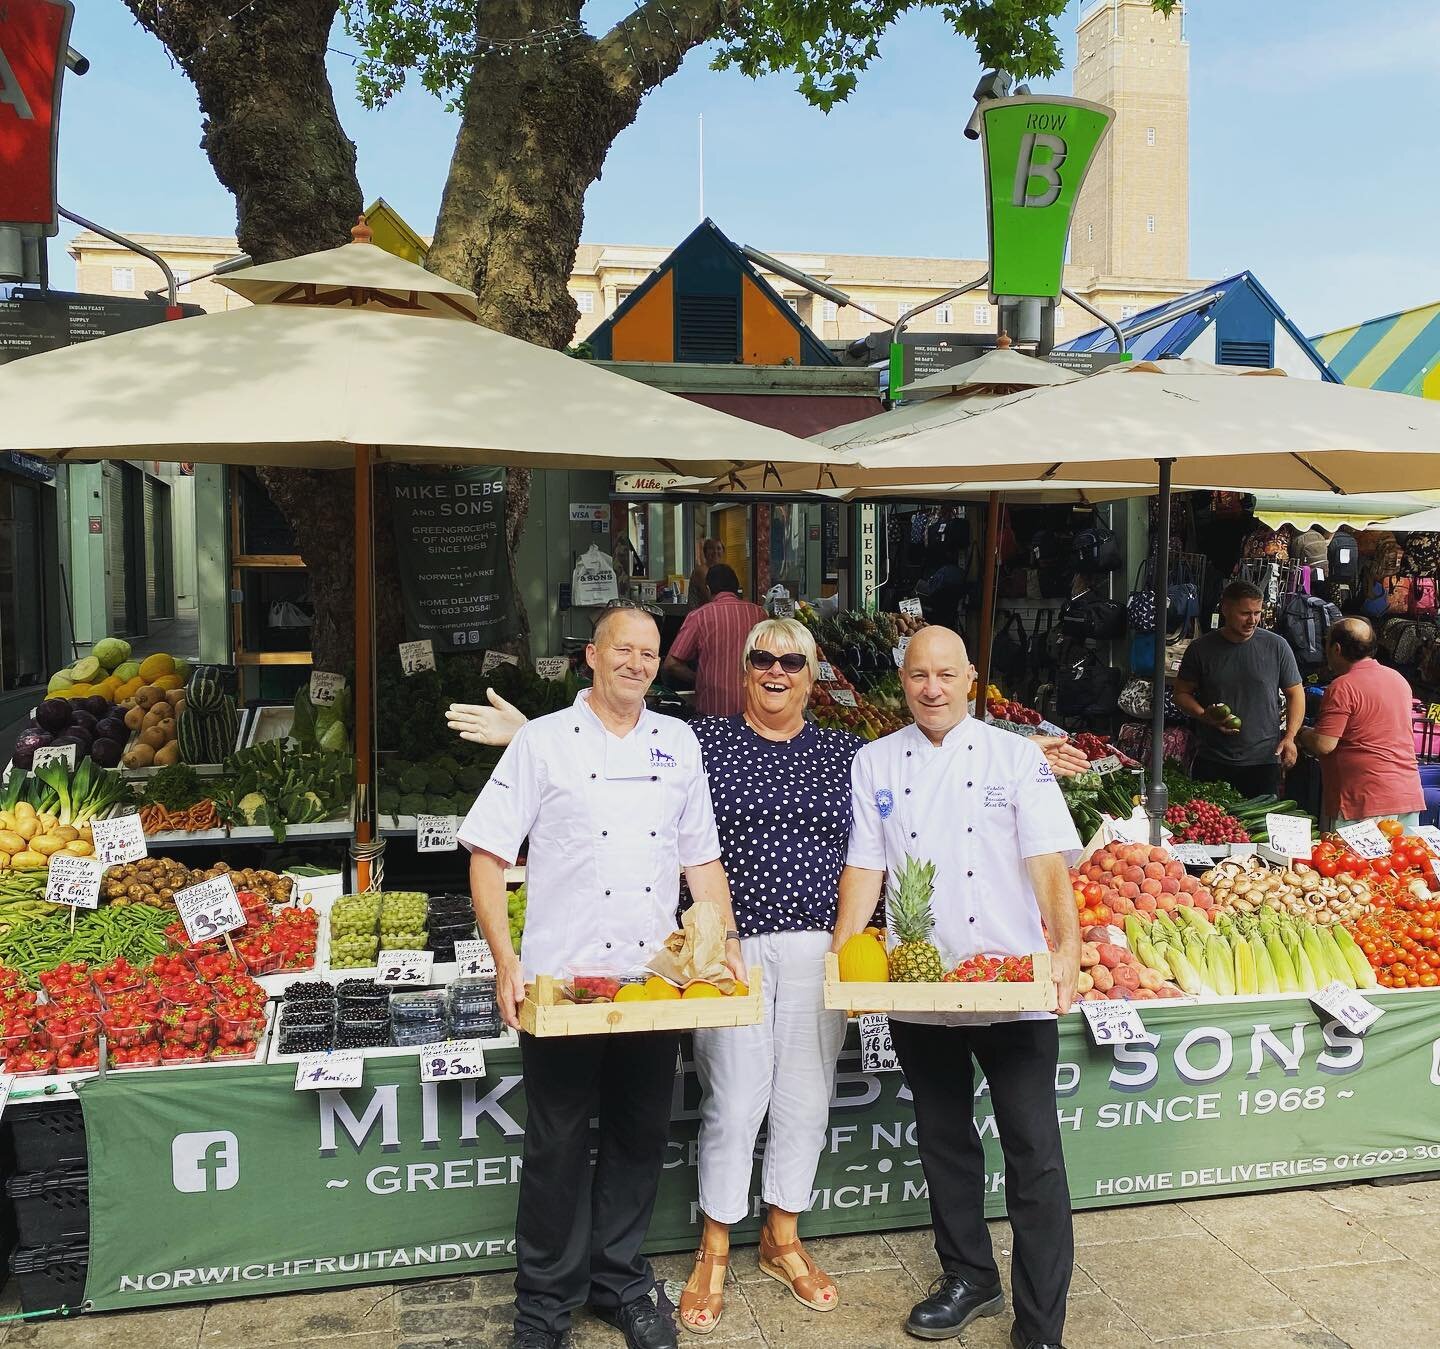 Fresh fruit ready for the boys and girls at @jarroldnorwich @jarroldfood today.

Over the years they have become more than good customers to us! Always a pleasure chaps! 

#norwich #norwichmarket #mikedebsandsons #jarrolds #jarroldsfood #fresh #fruit